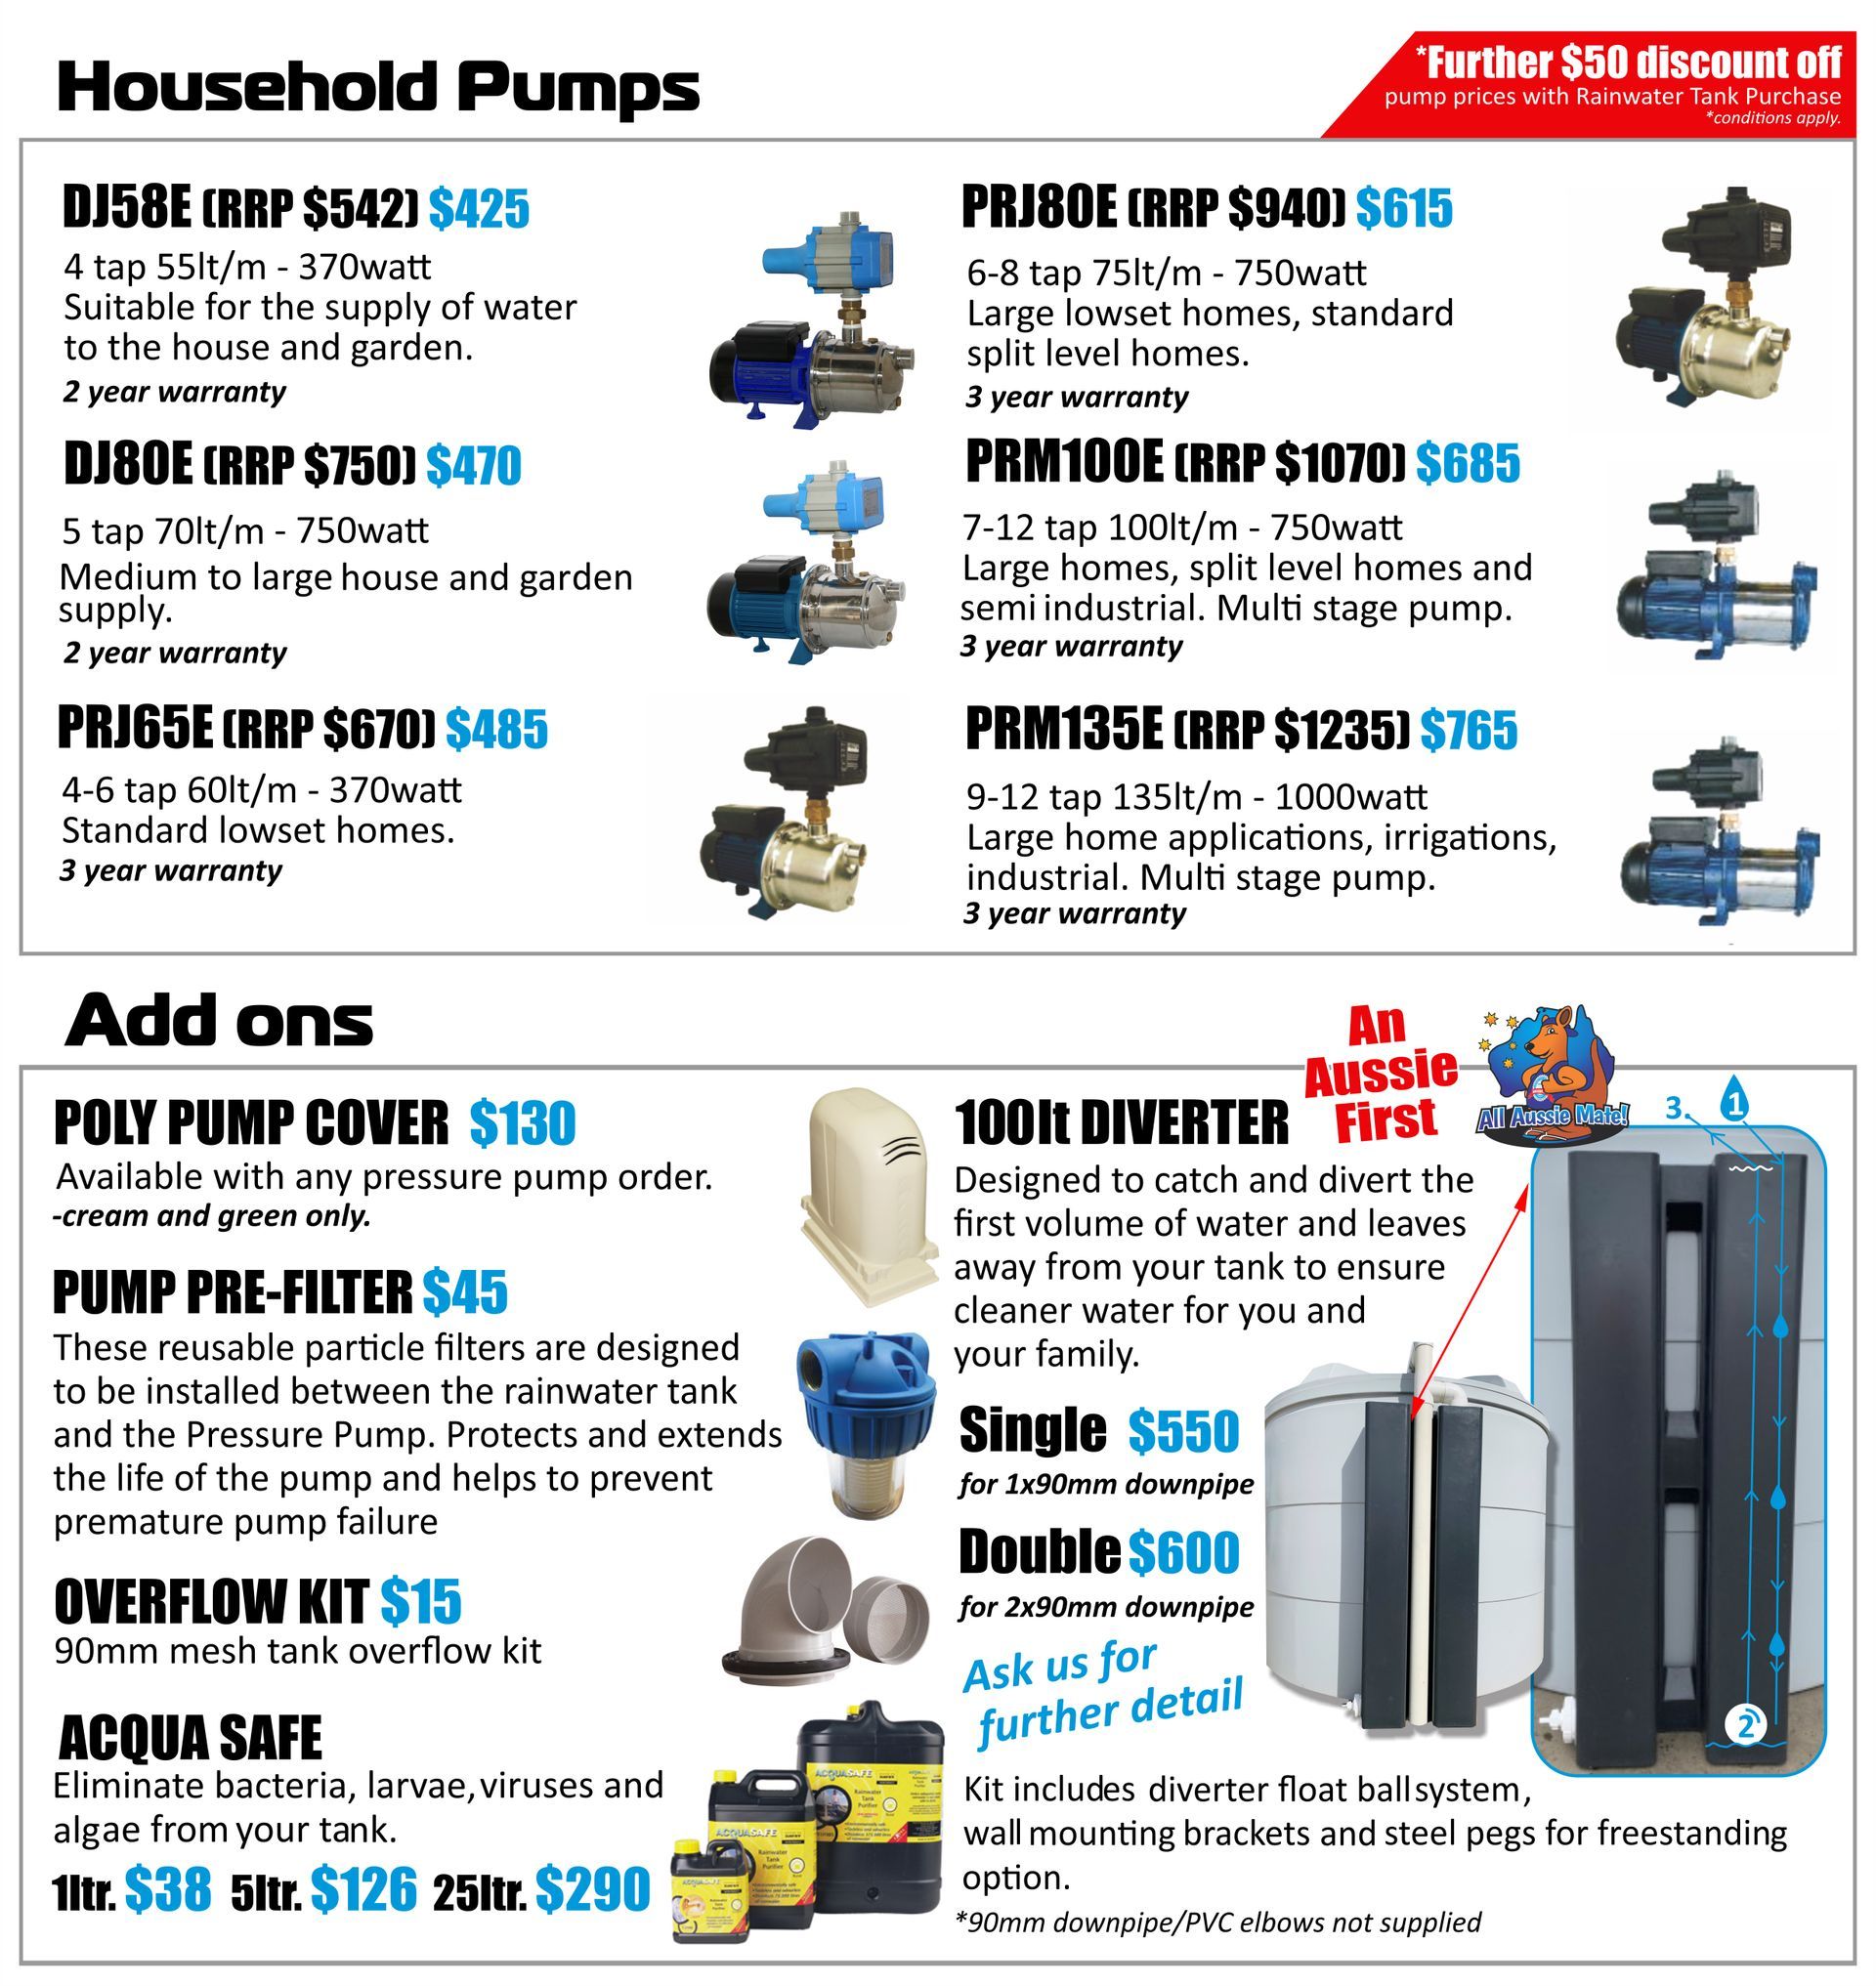 Household Pumps Price Description and Add-Ons | Queensland | Rain Again Tanks